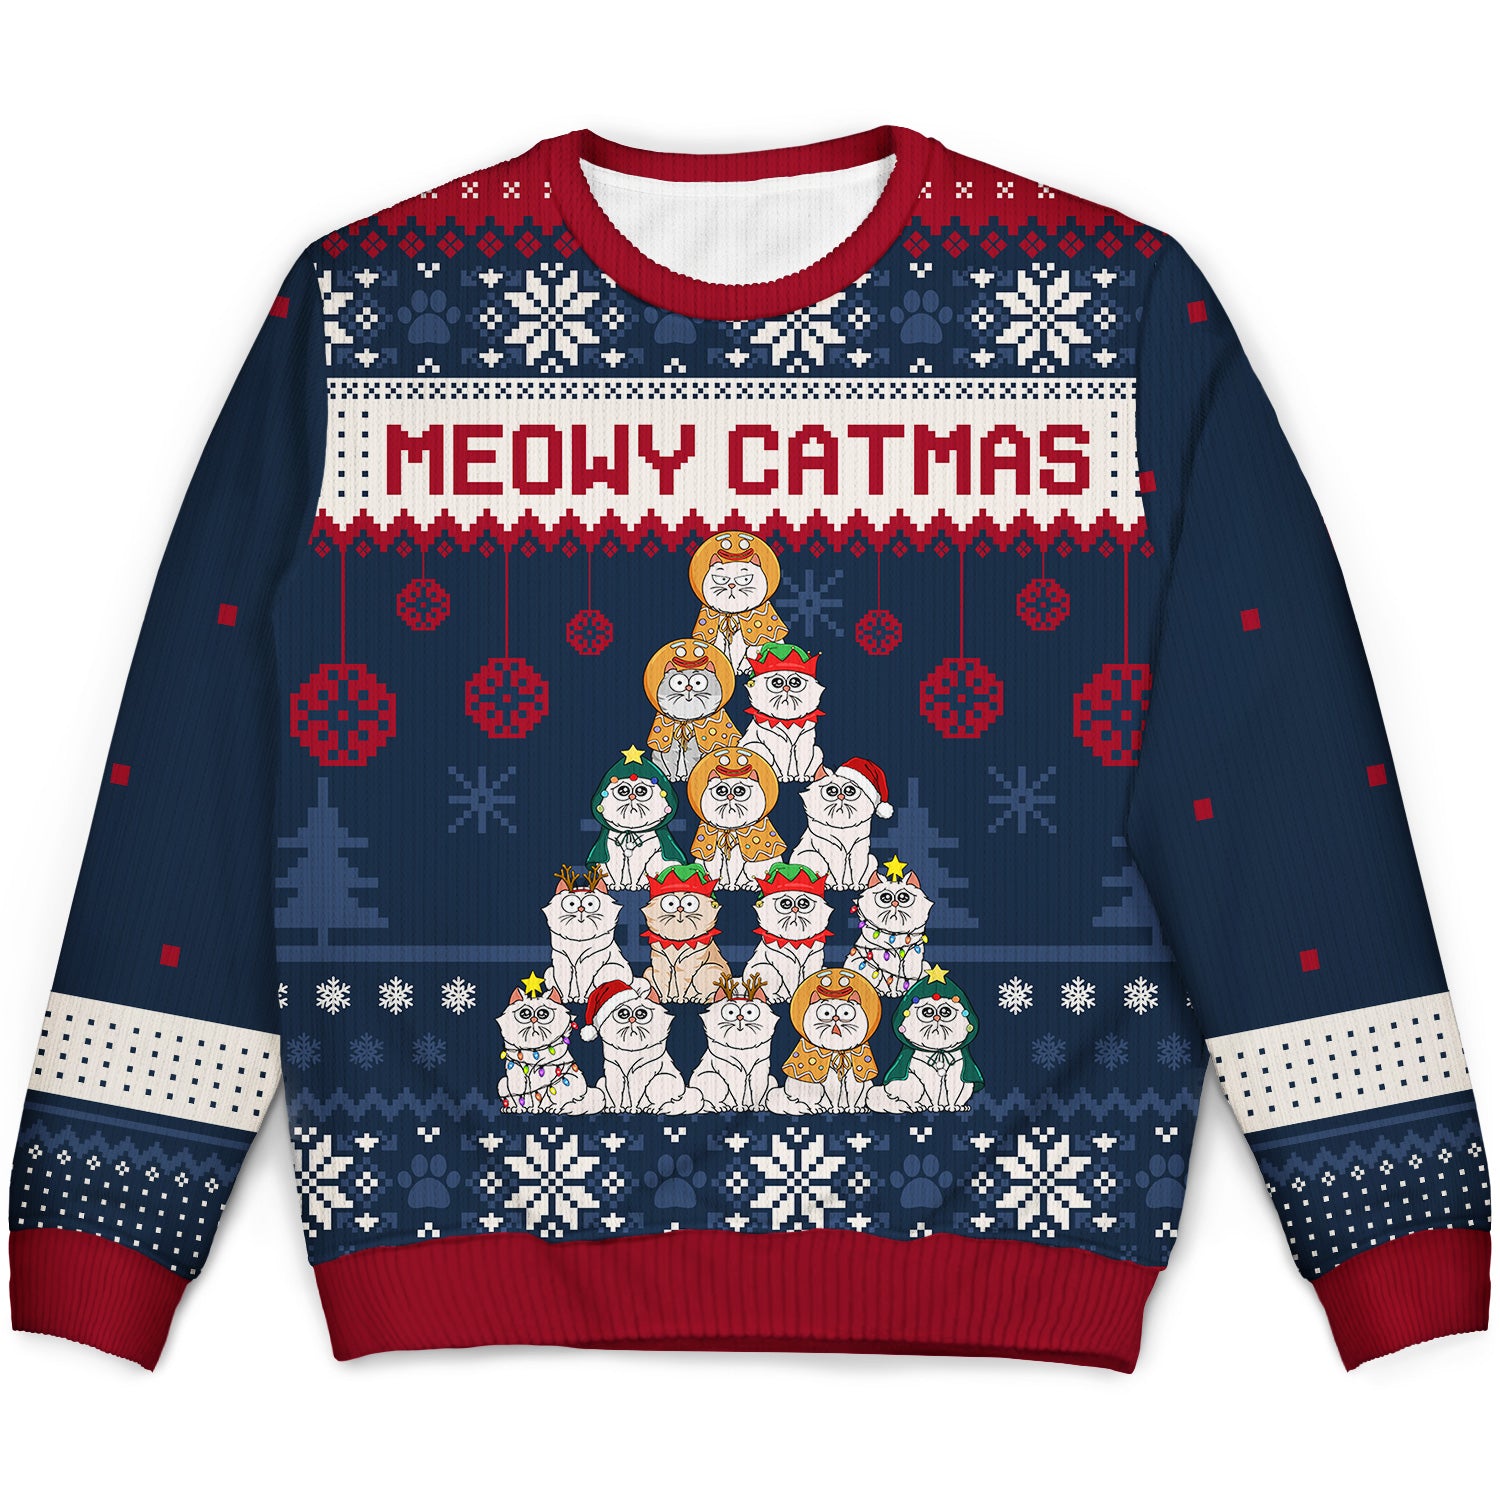 Meowy Catmas Christmas Tree Cartoon Style - Gift For Cat Lovers - Personalized Unisex Ugly Sweater